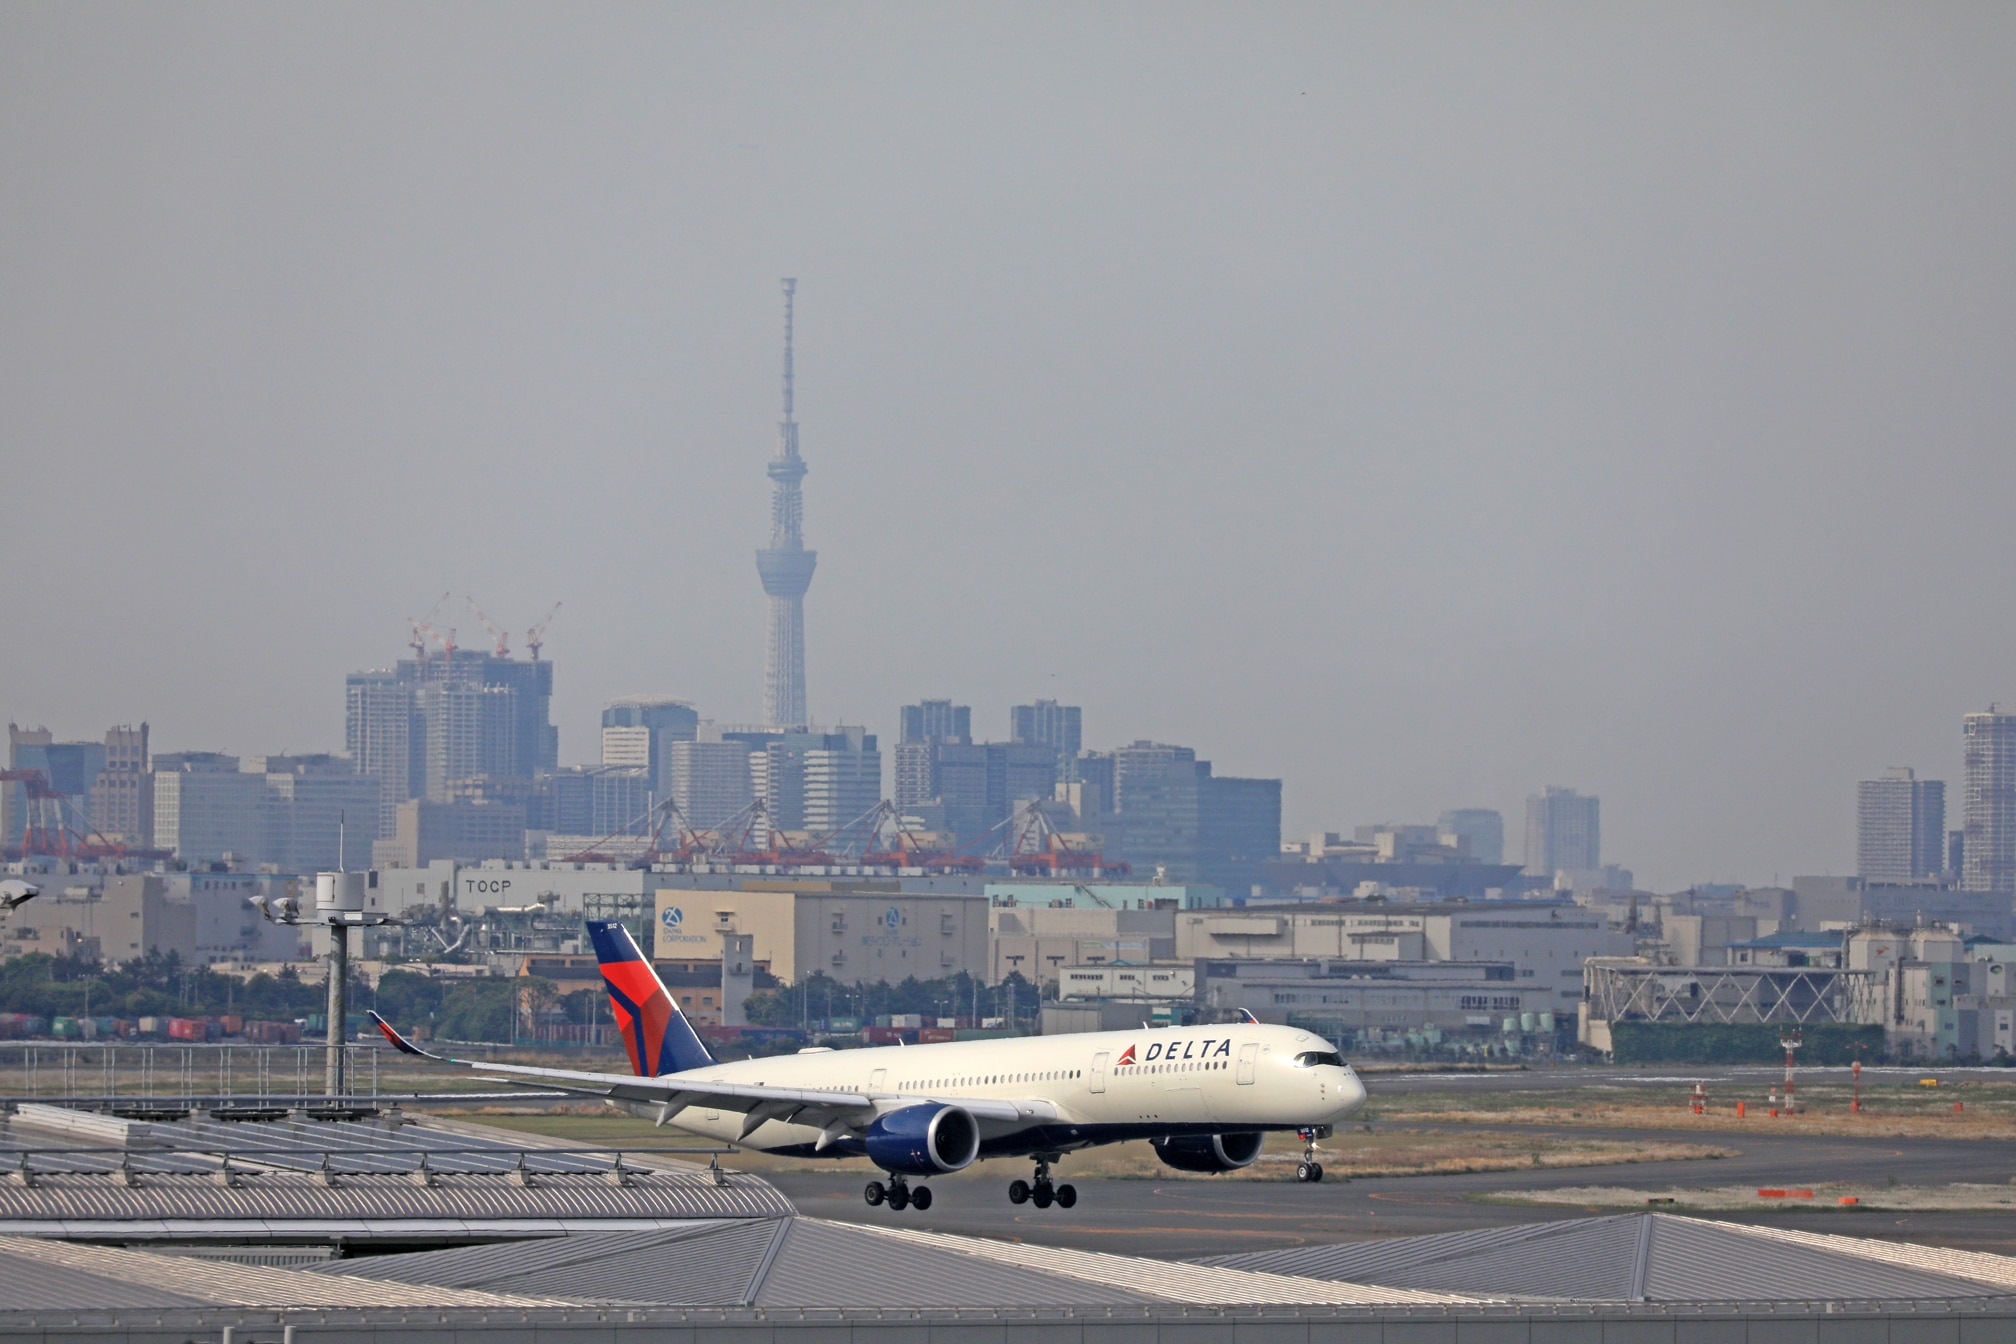 Delta resumes nonstop service from LAX to Haneda; launches new service from Honolulu